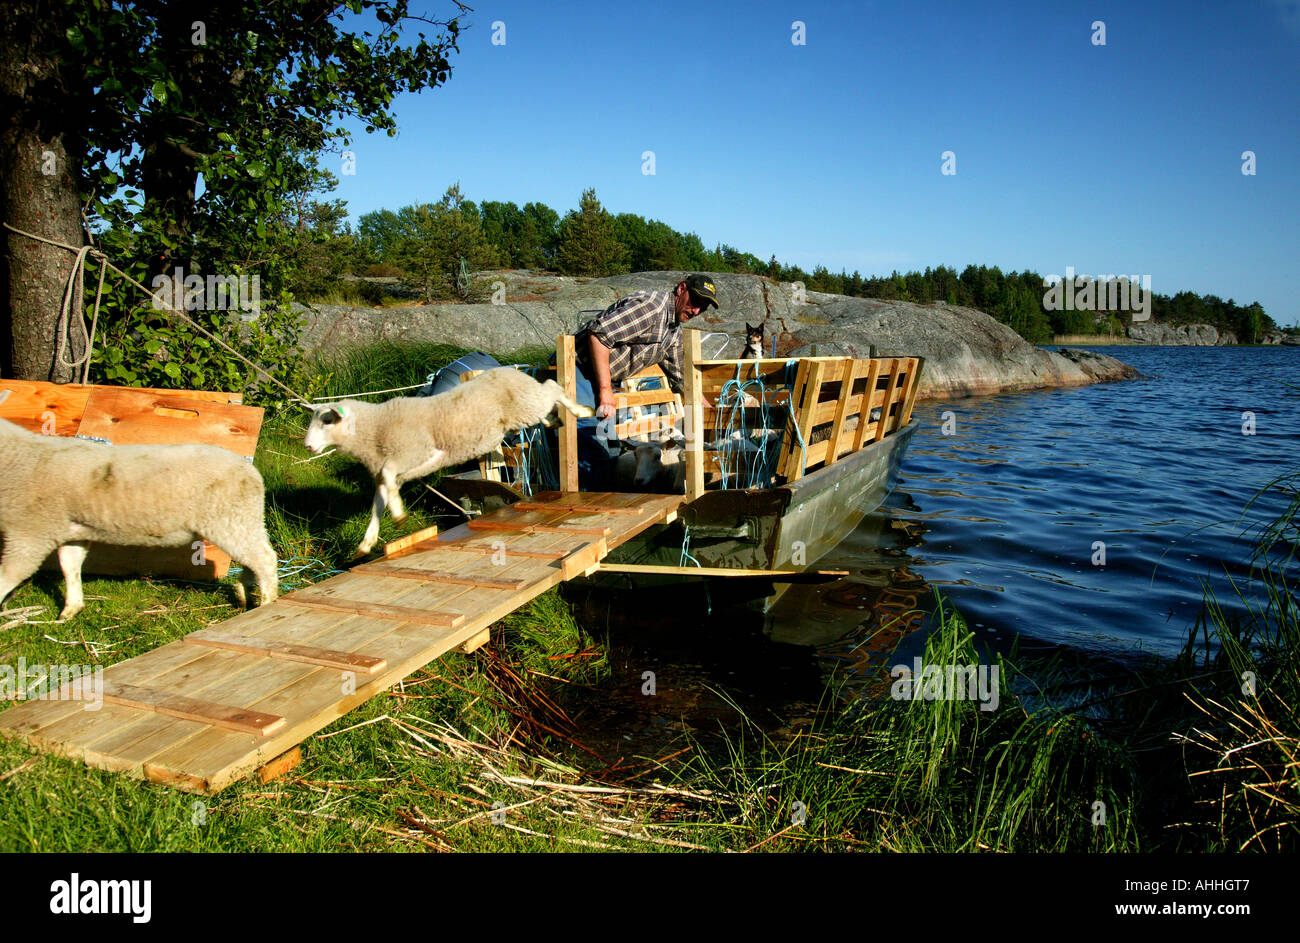 Sheep jumping off a boat at the island Østenrødøya in the lake Vansjø in Østfold, Norway. Vansjø is a part of the water system called Morsavassdraget. Stock Photo